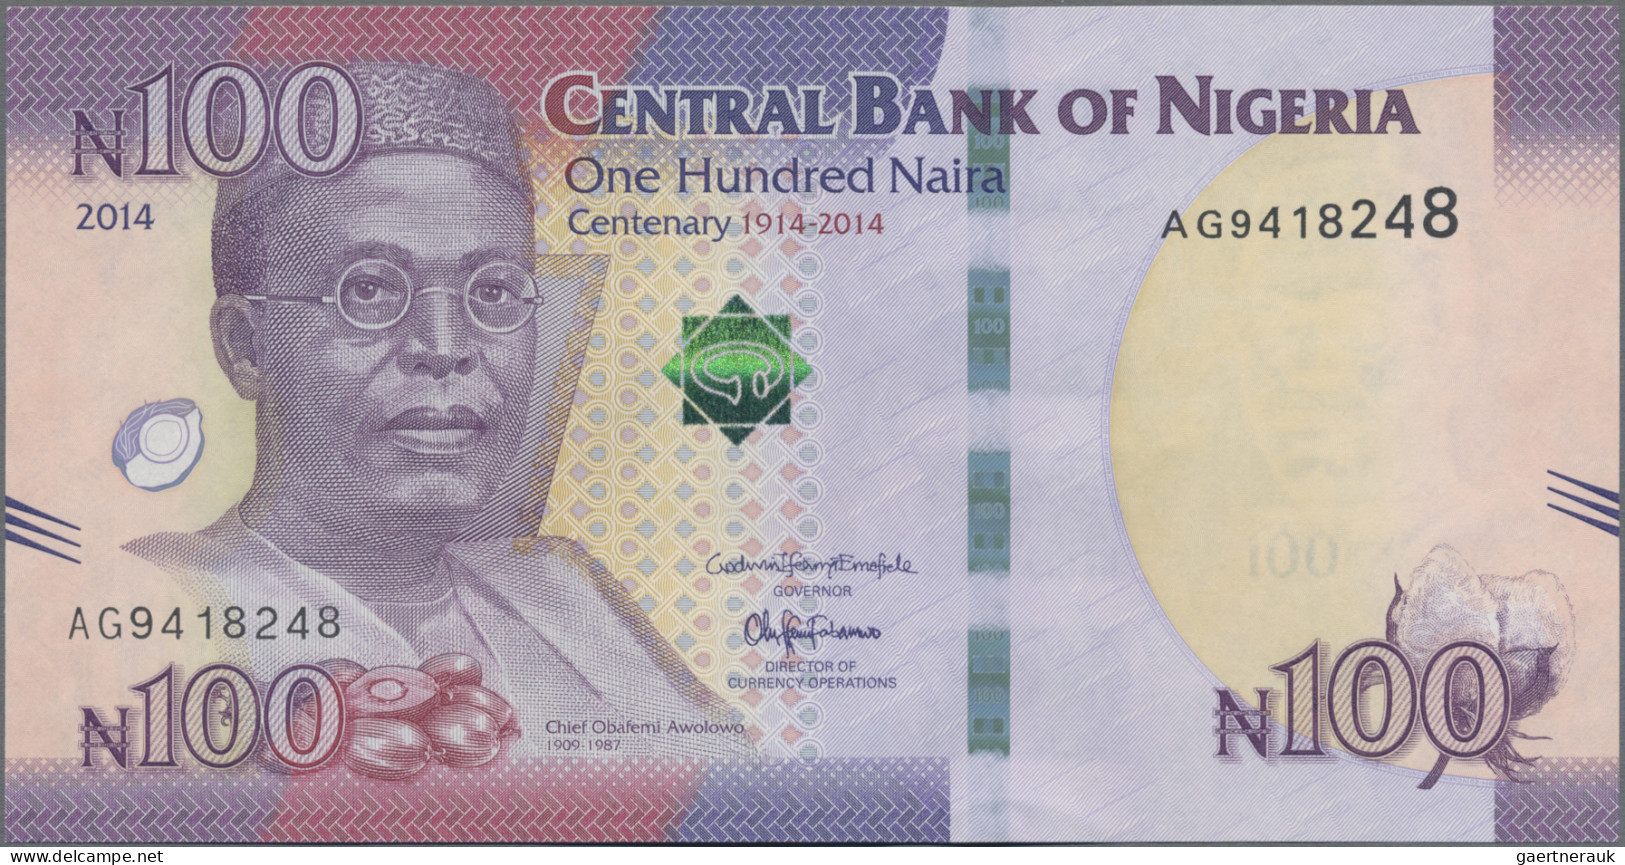 Nigeria: Central Bank of Nigeria, huge lot with 27 banknotes, 1979-2014 series,